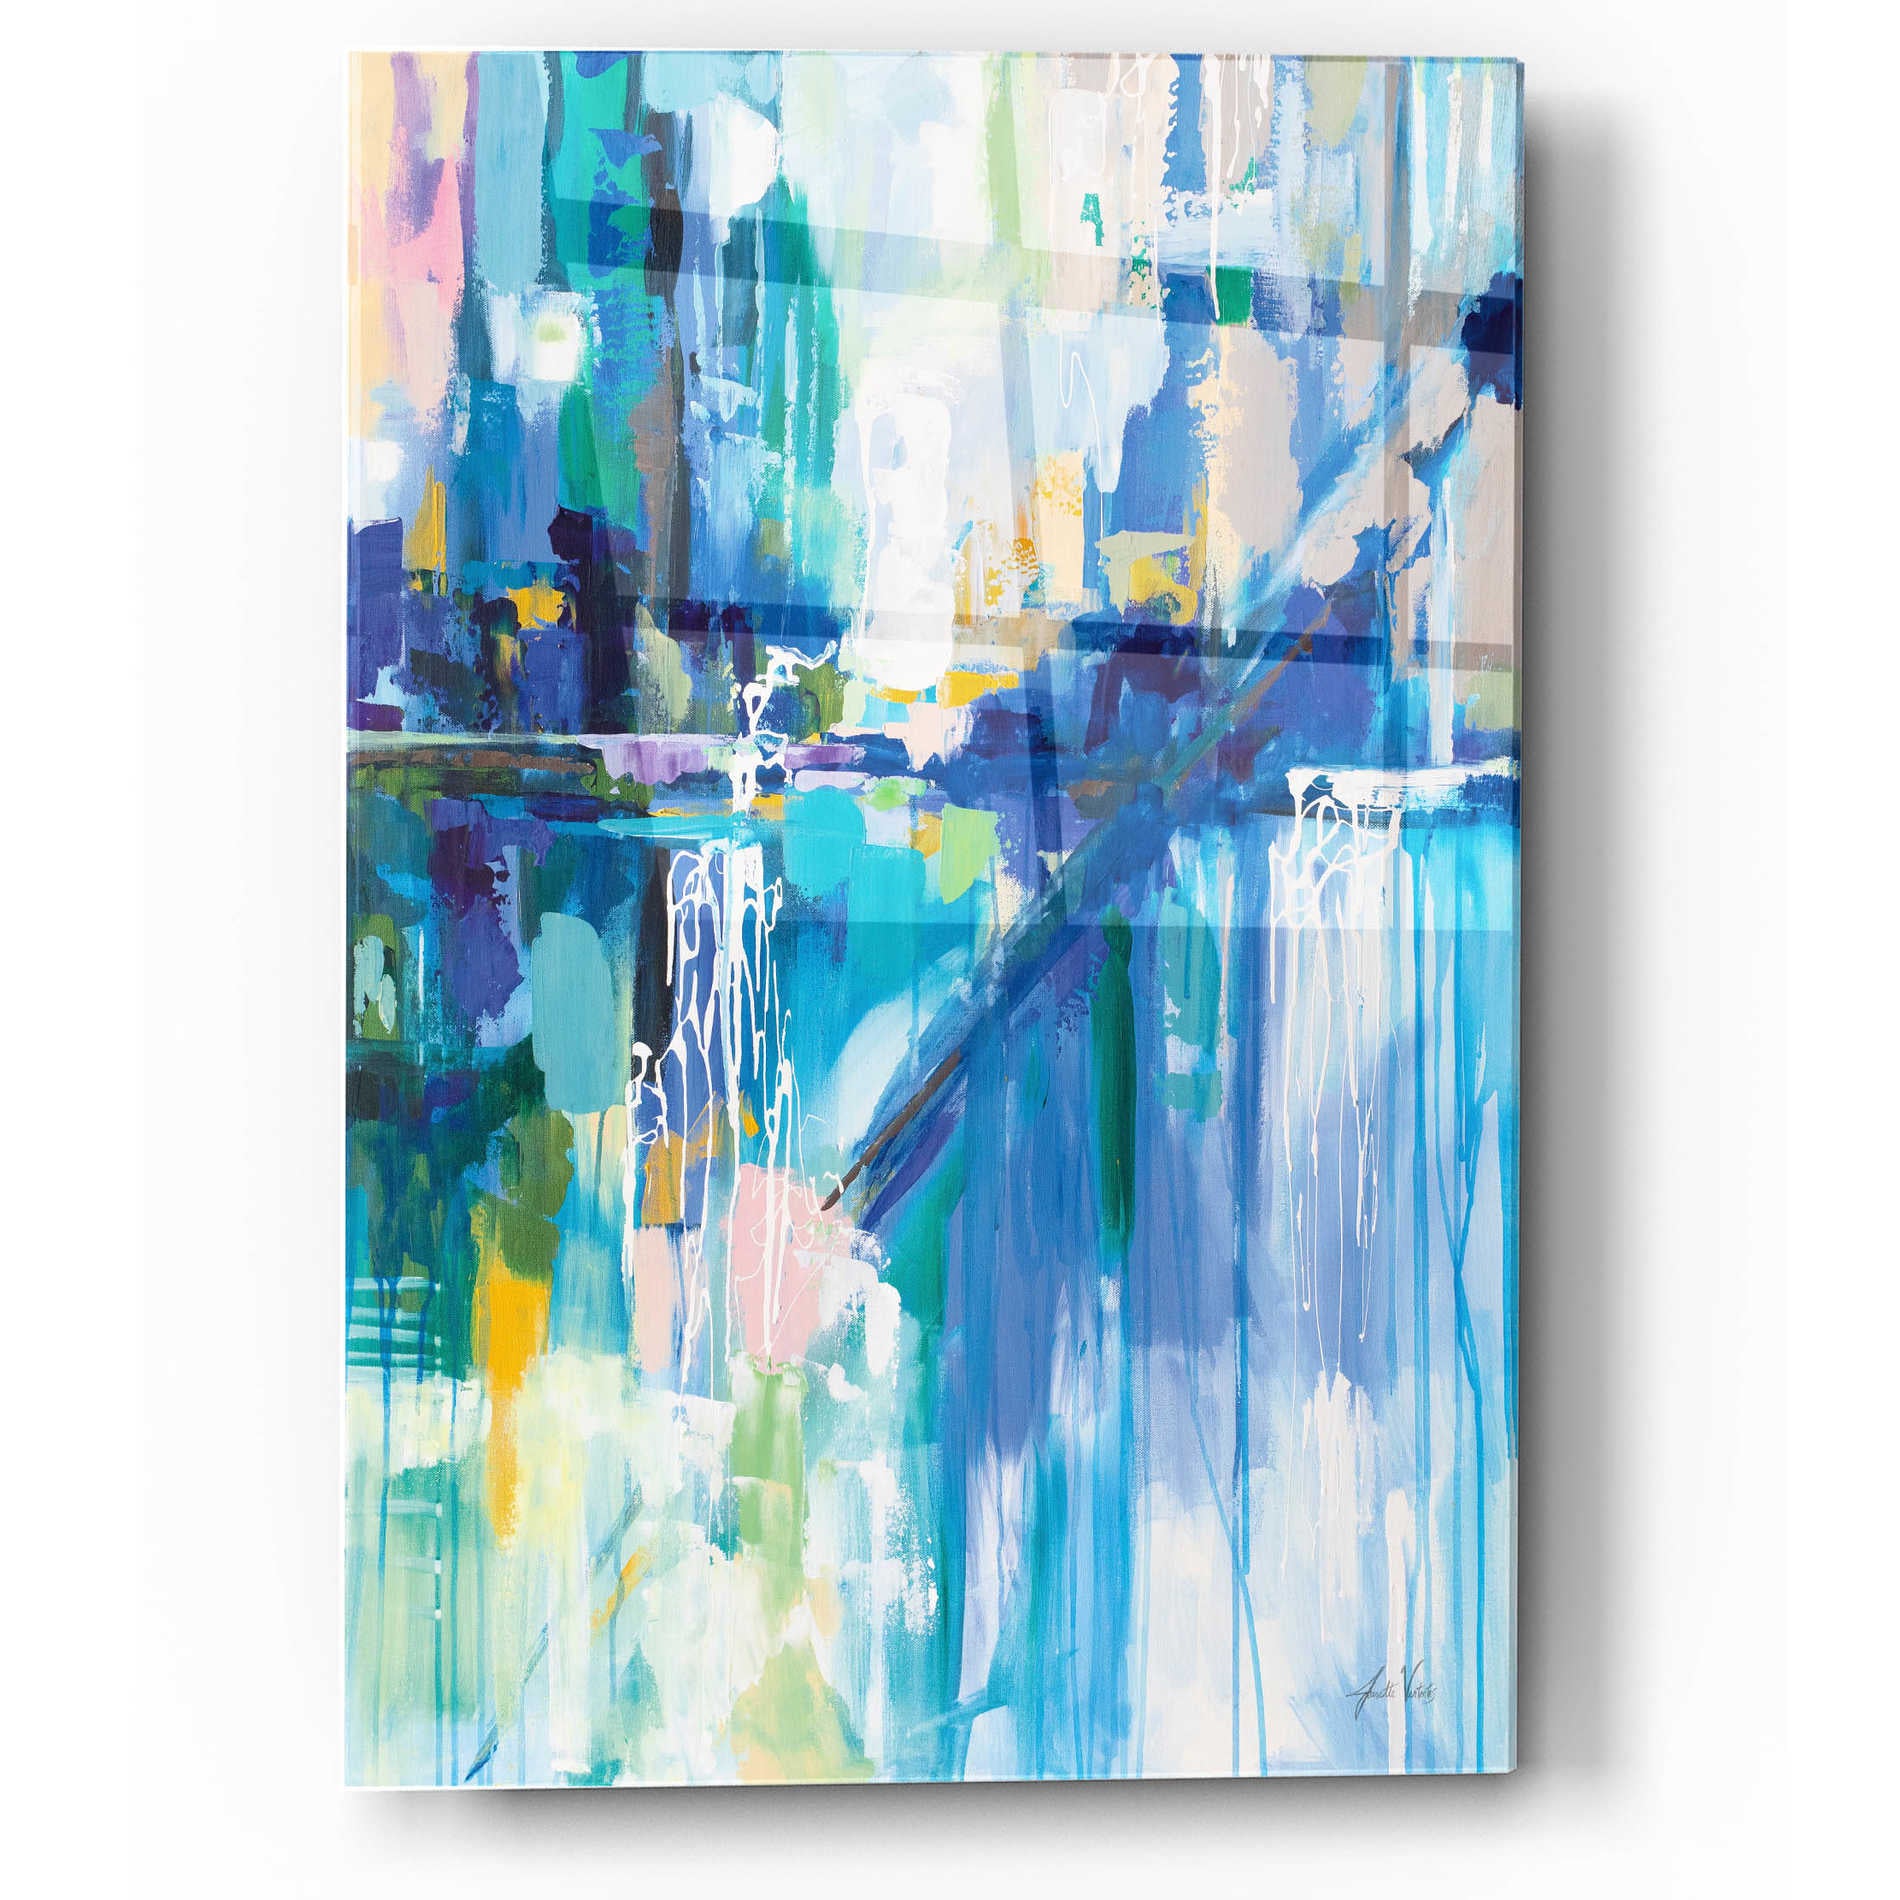 Epic Art 'Thru the Glass' by Jeanette Vertentes, Acrylic Glass Wall Art,12x16